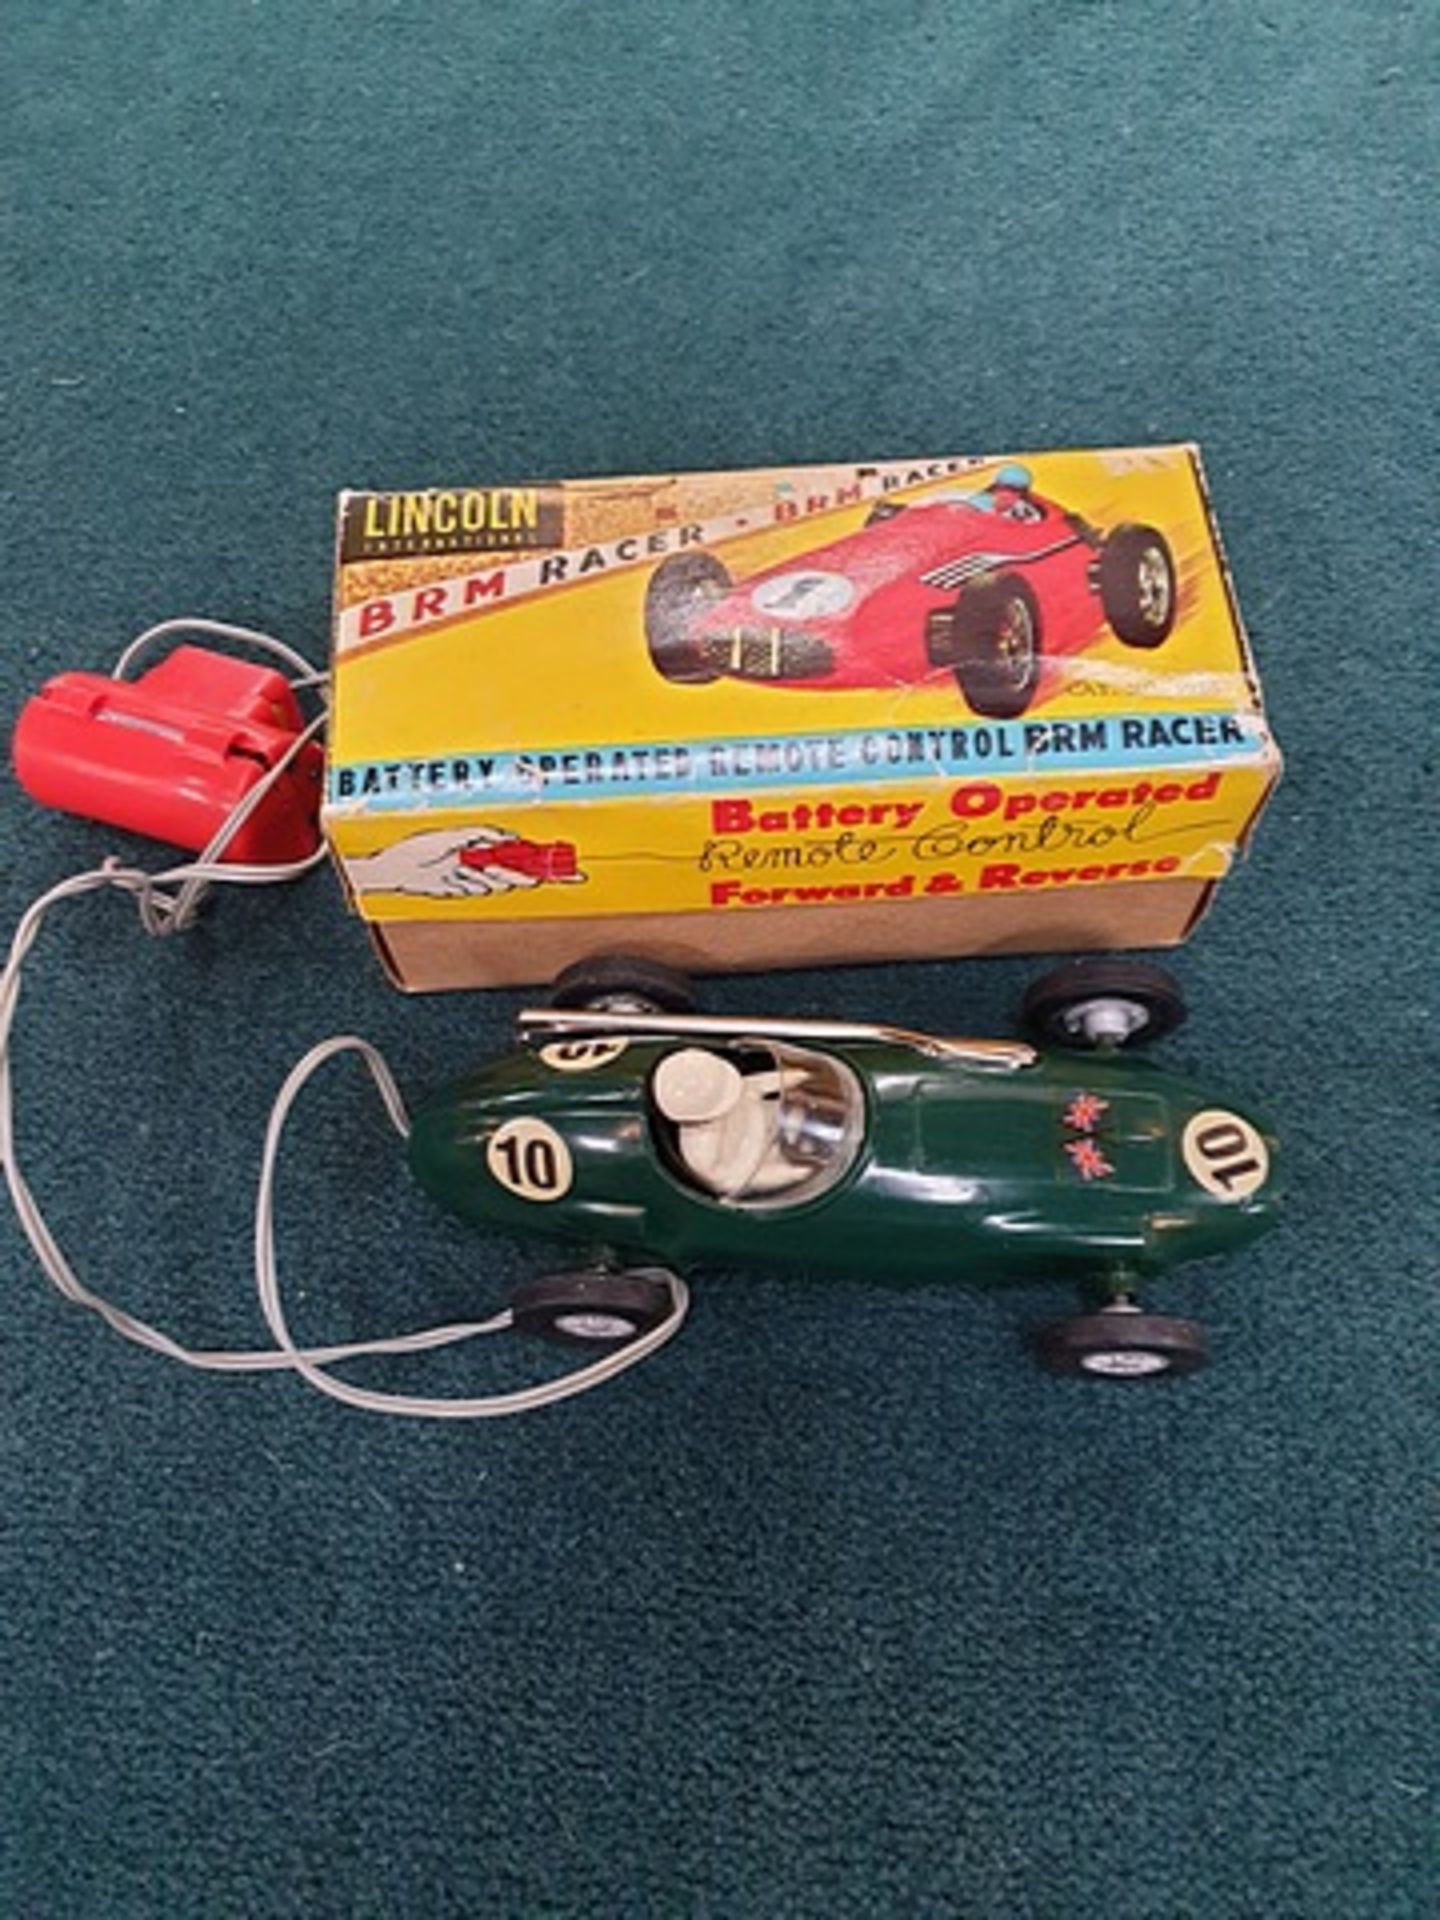 Lincoln International # 5926 Battery Operated Remote Control BRM Racer Complete With Box - Image 2 of 2